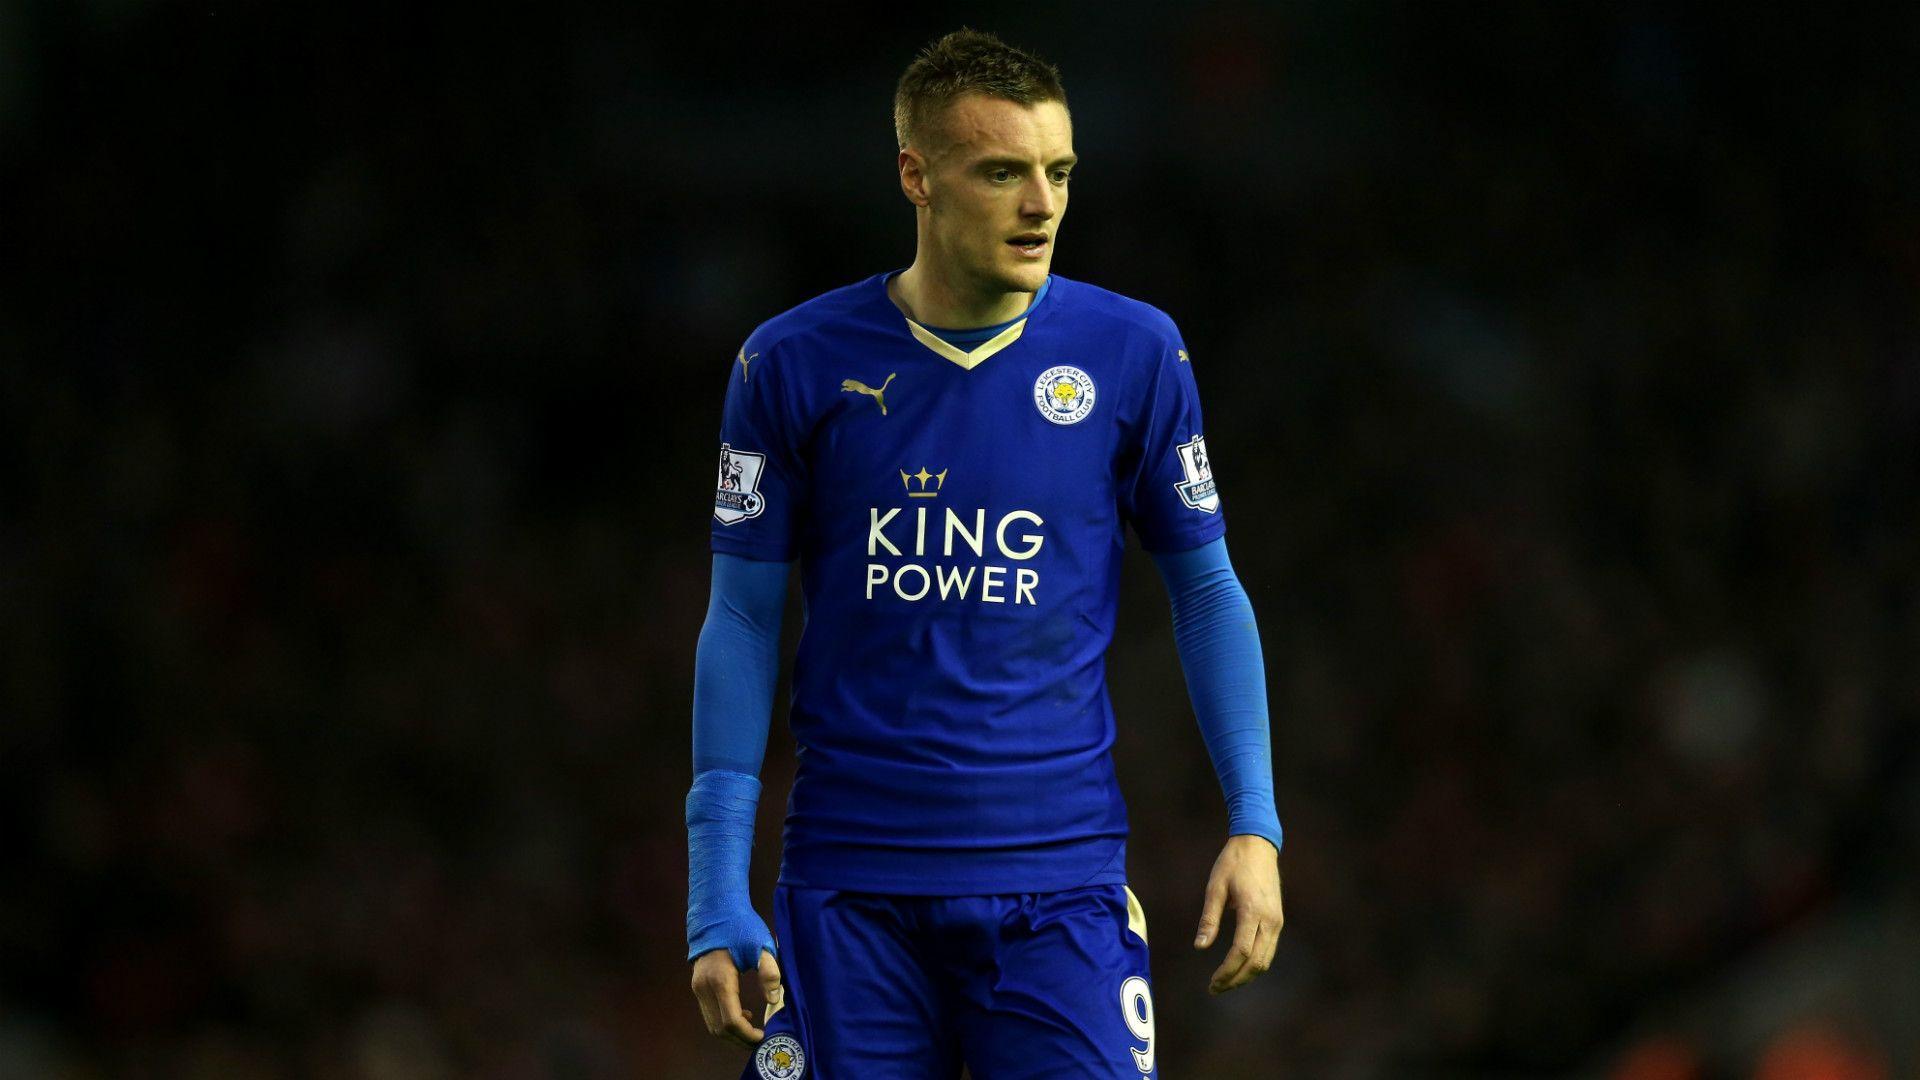 Vardy set to miss FA Cup clash due to surgery. The Fantasy